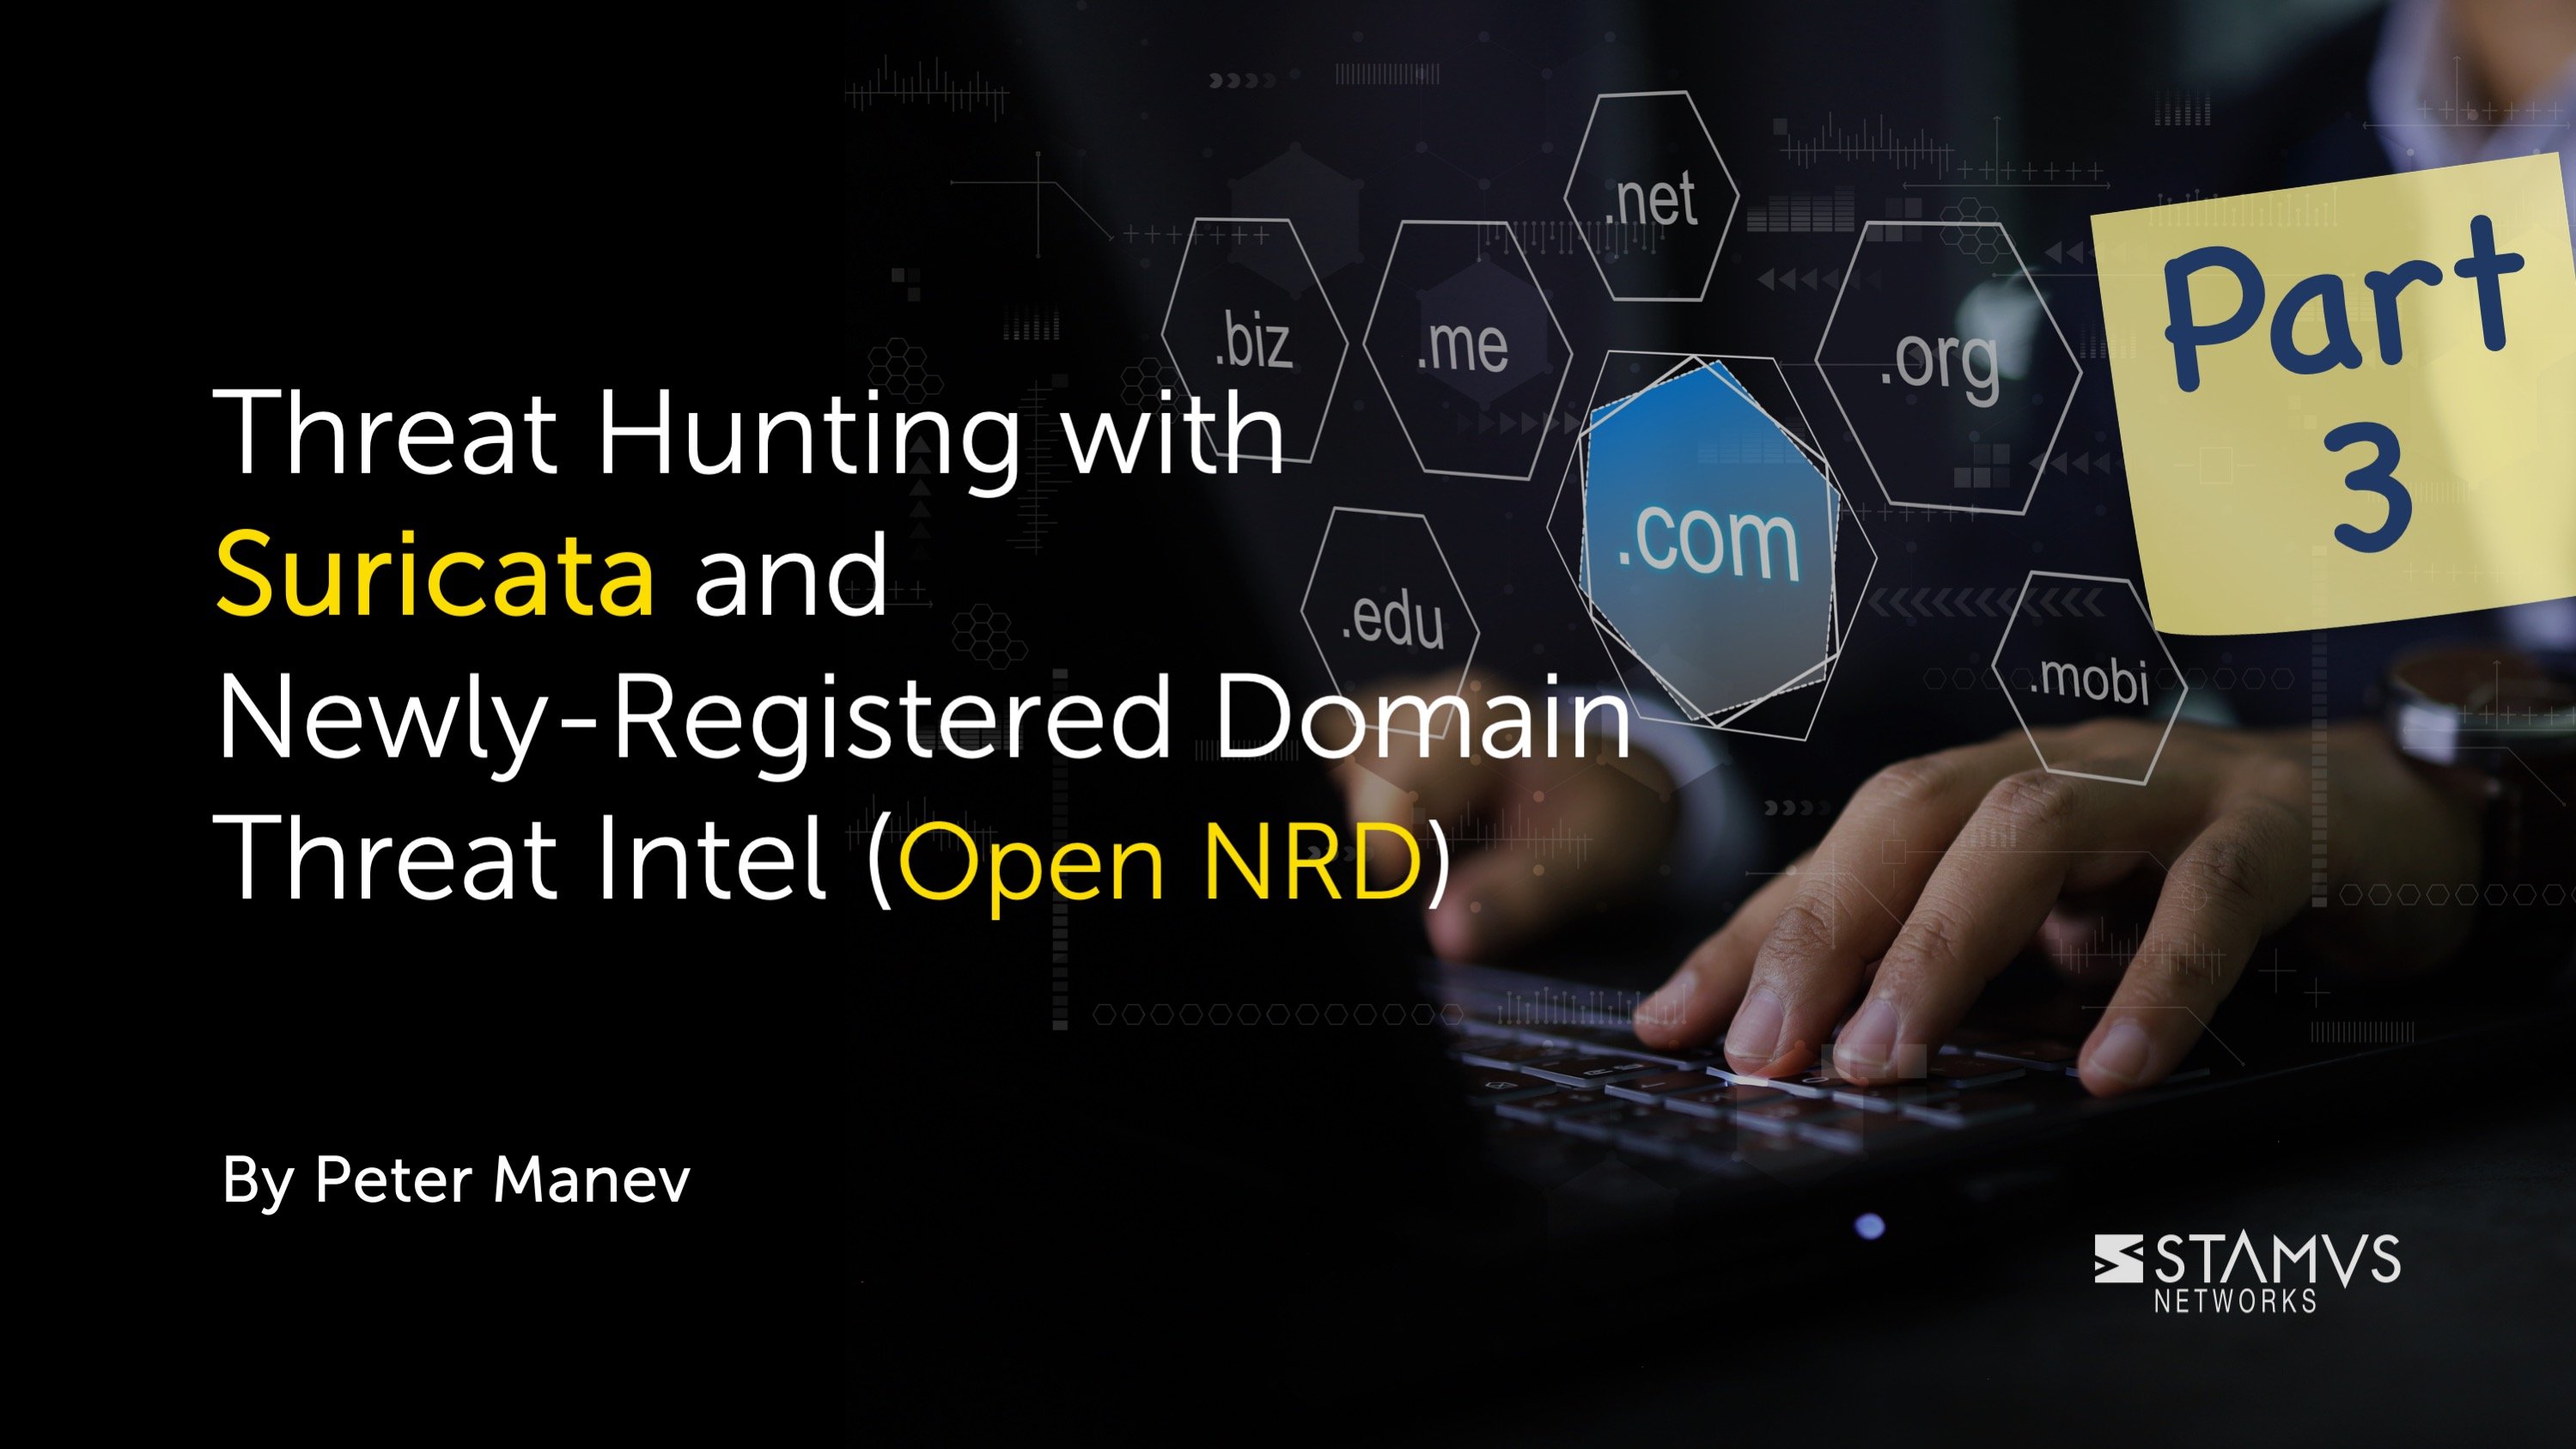 Threat Hunting with Suricata and Newly-Registered Domain Threat Intel (Open NRD) Part 3